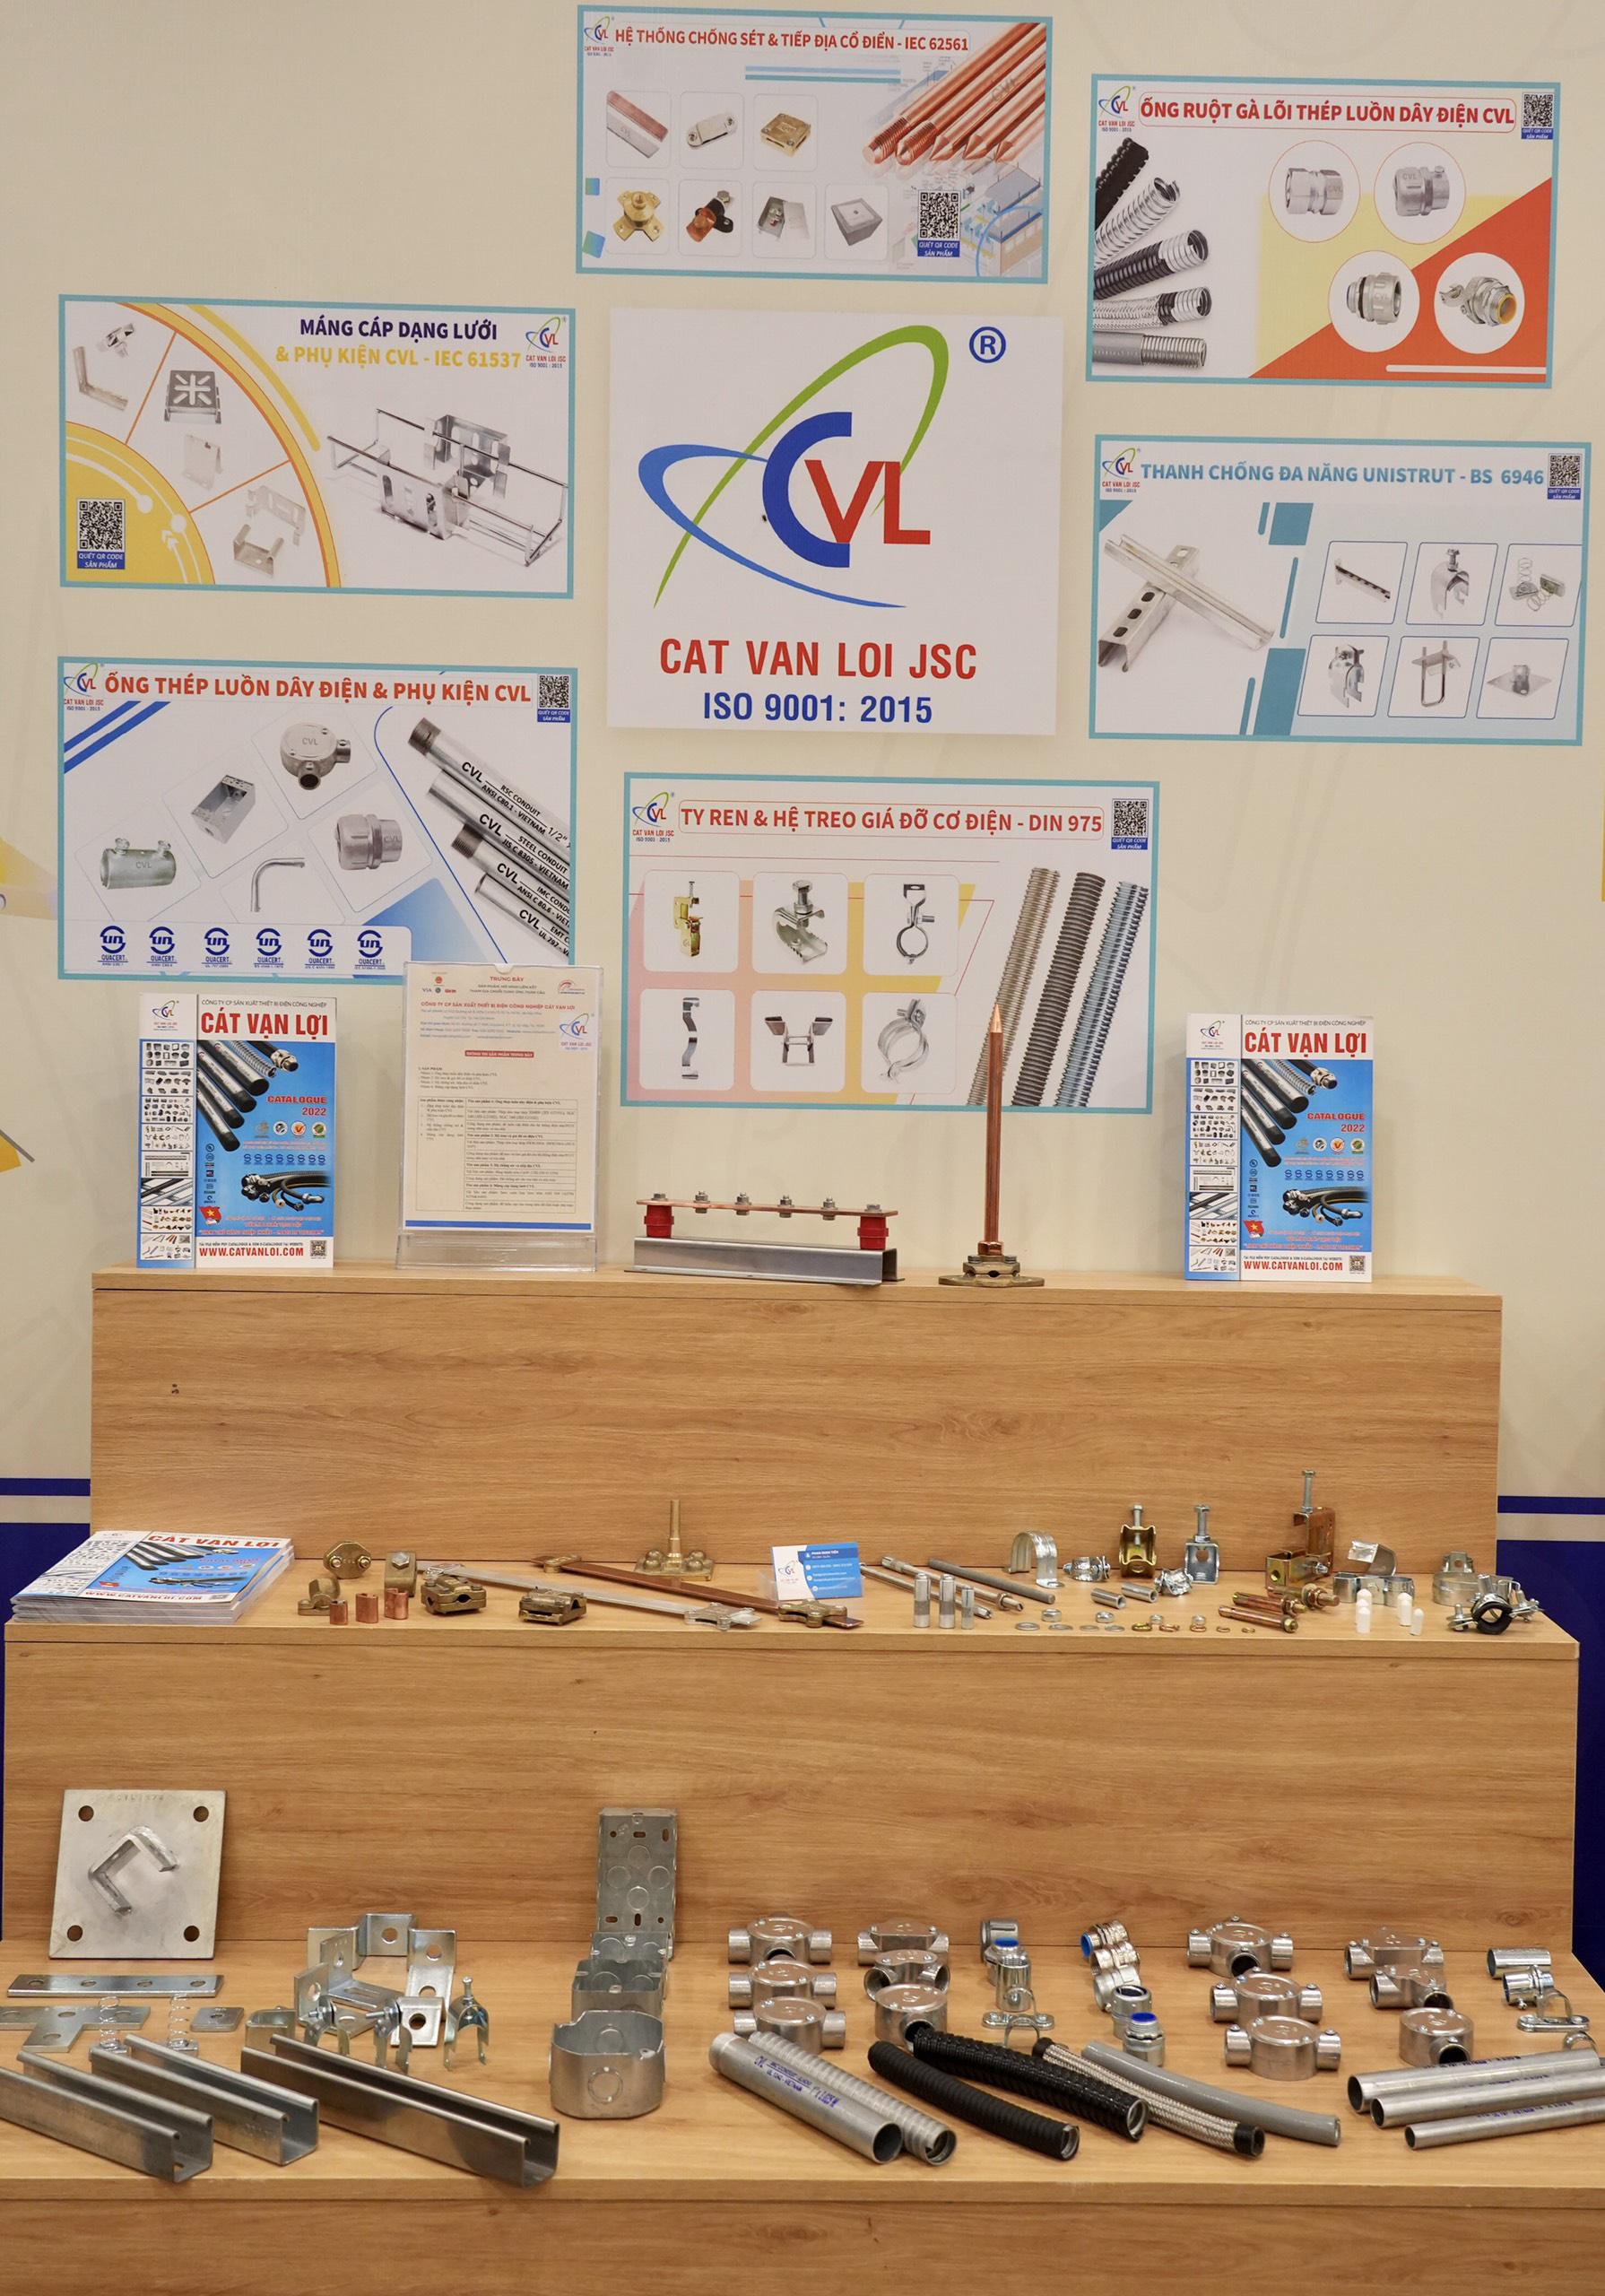 Cat Van Loi’s components are on display at a seminar in Ho Chi Minh City, February 28, 2023. Photo: Huu Hanh / Tuoi Tre